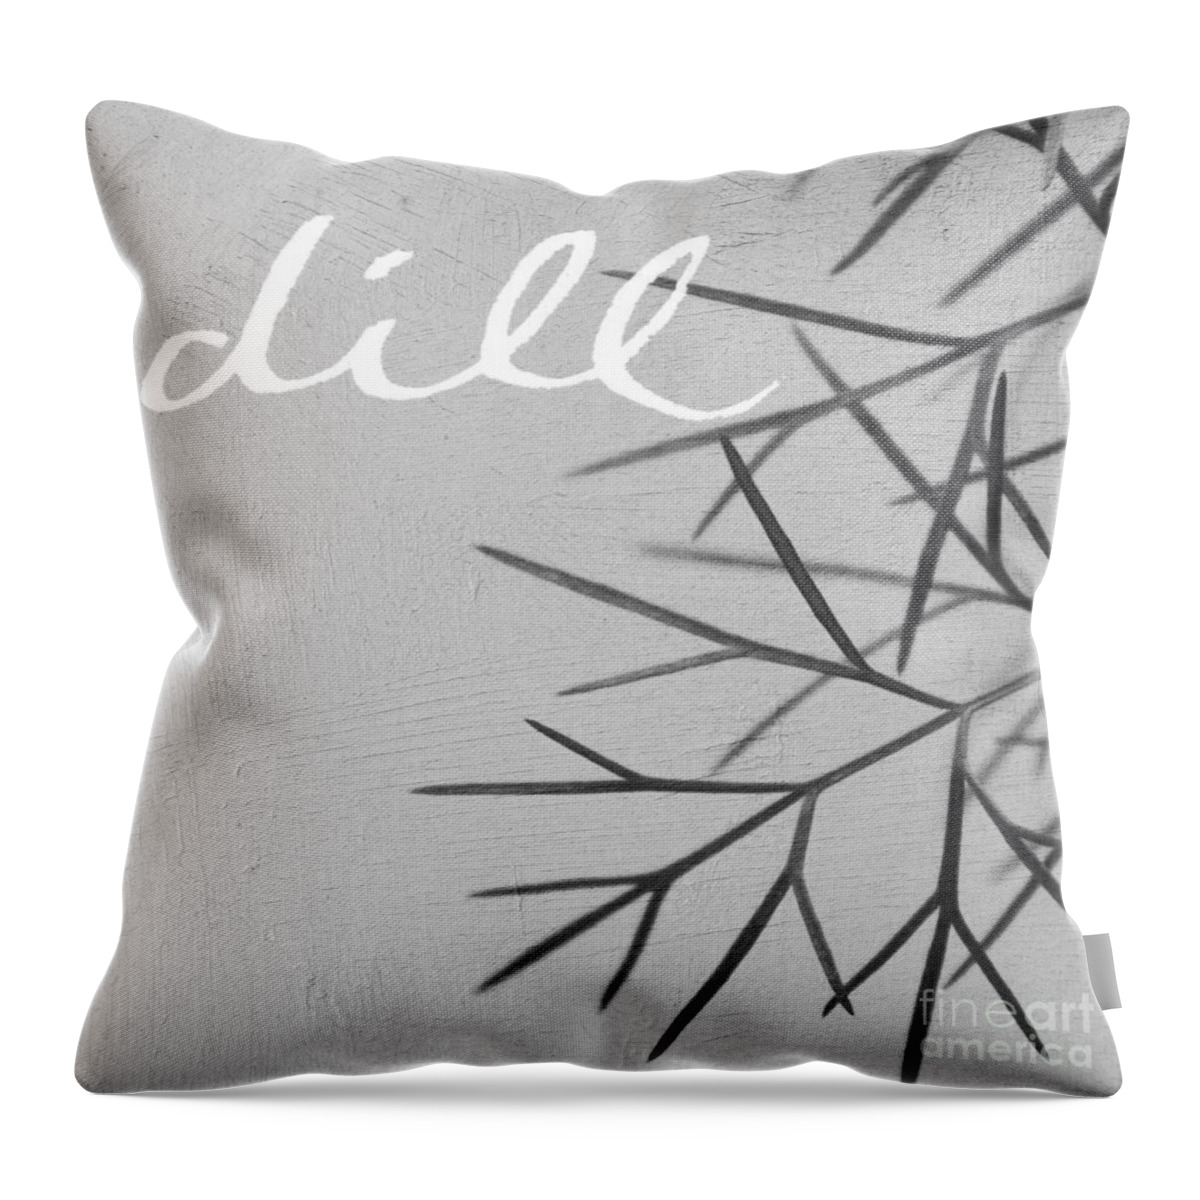 Dill Throw Pillow featuring the mixed media Dill by Linda Woods